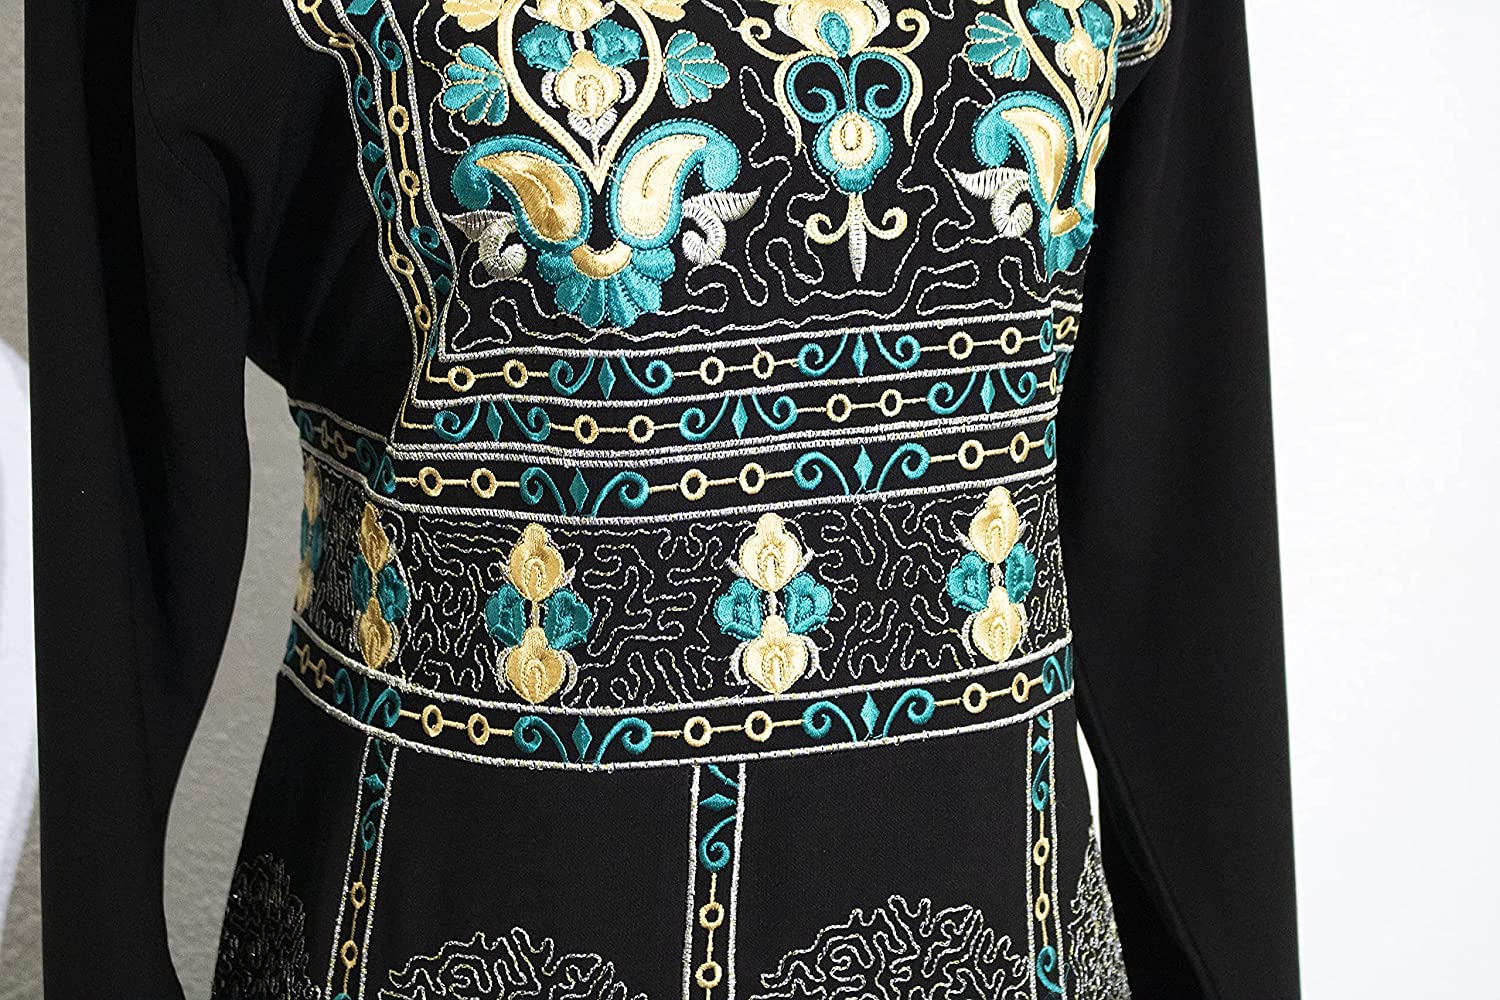 Marwa Fashion Thobe Dress for Women with Traditional Palestinian Embroidery - Islamic Muslim Costume for Wedding, Party & Dinner